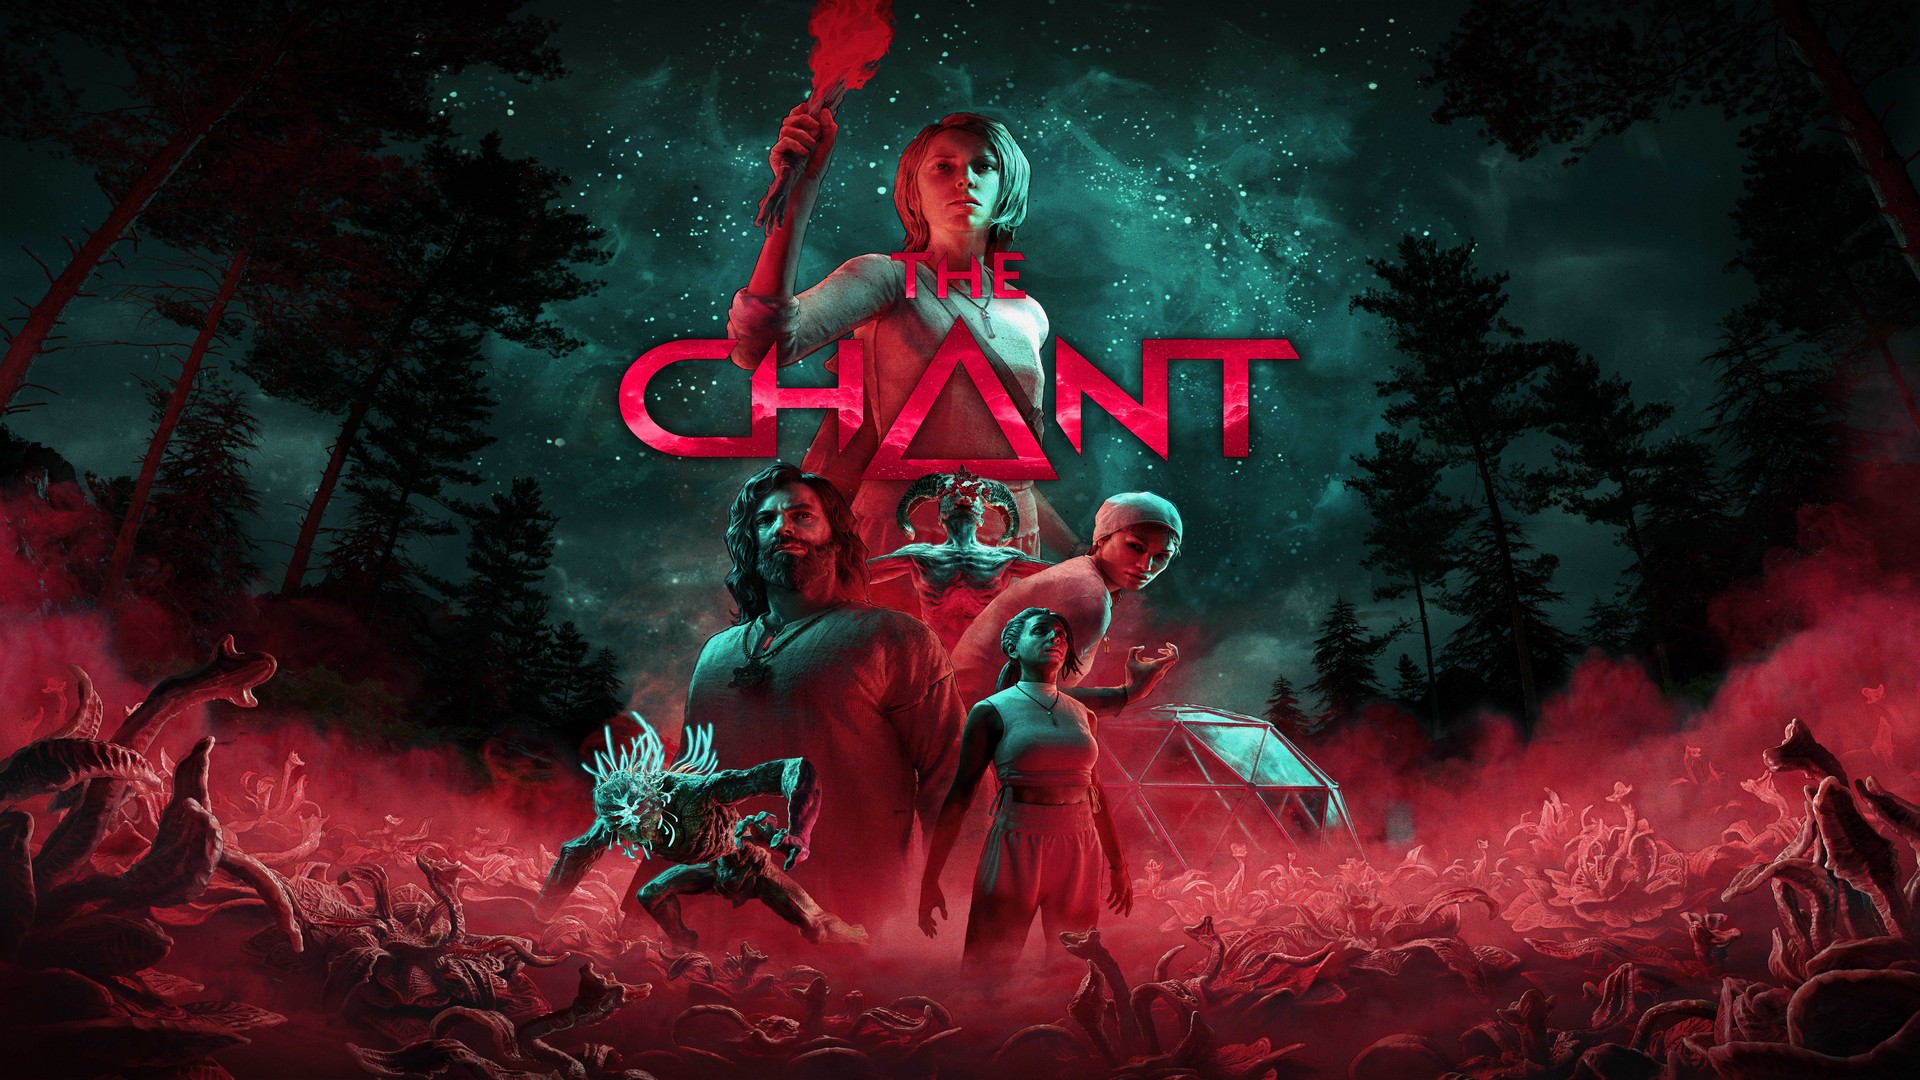 Begin Your Spiritual Nightmare In The Chant – Out Now On PC & Consoles